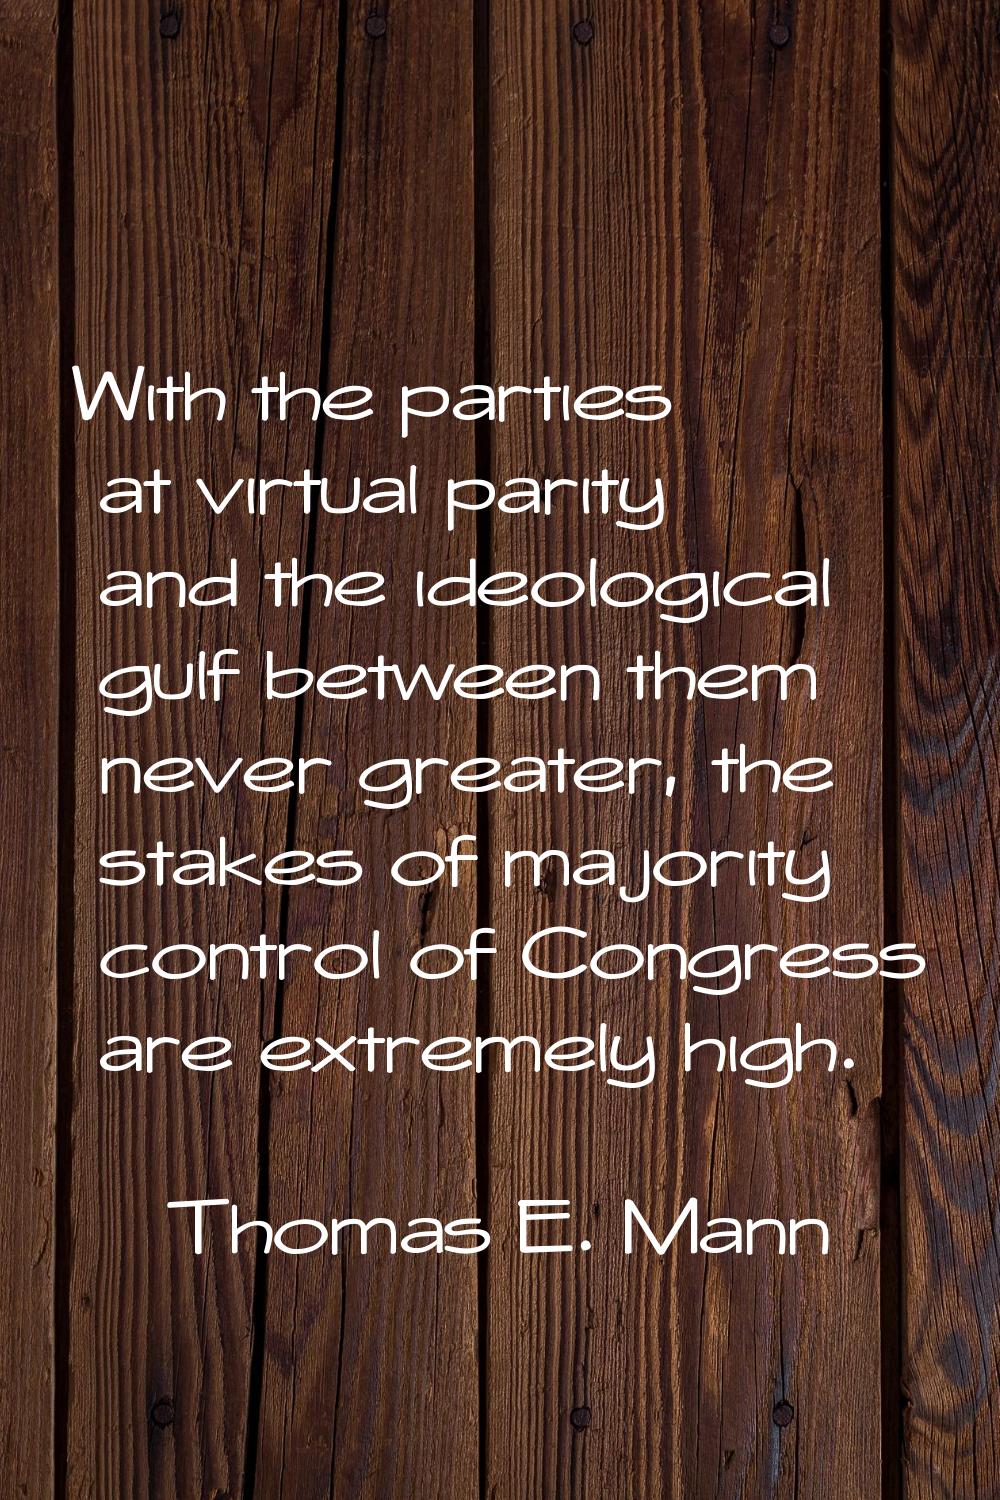 With the parties at virtual parity and the ideological gulf between them never greater, the stakes 